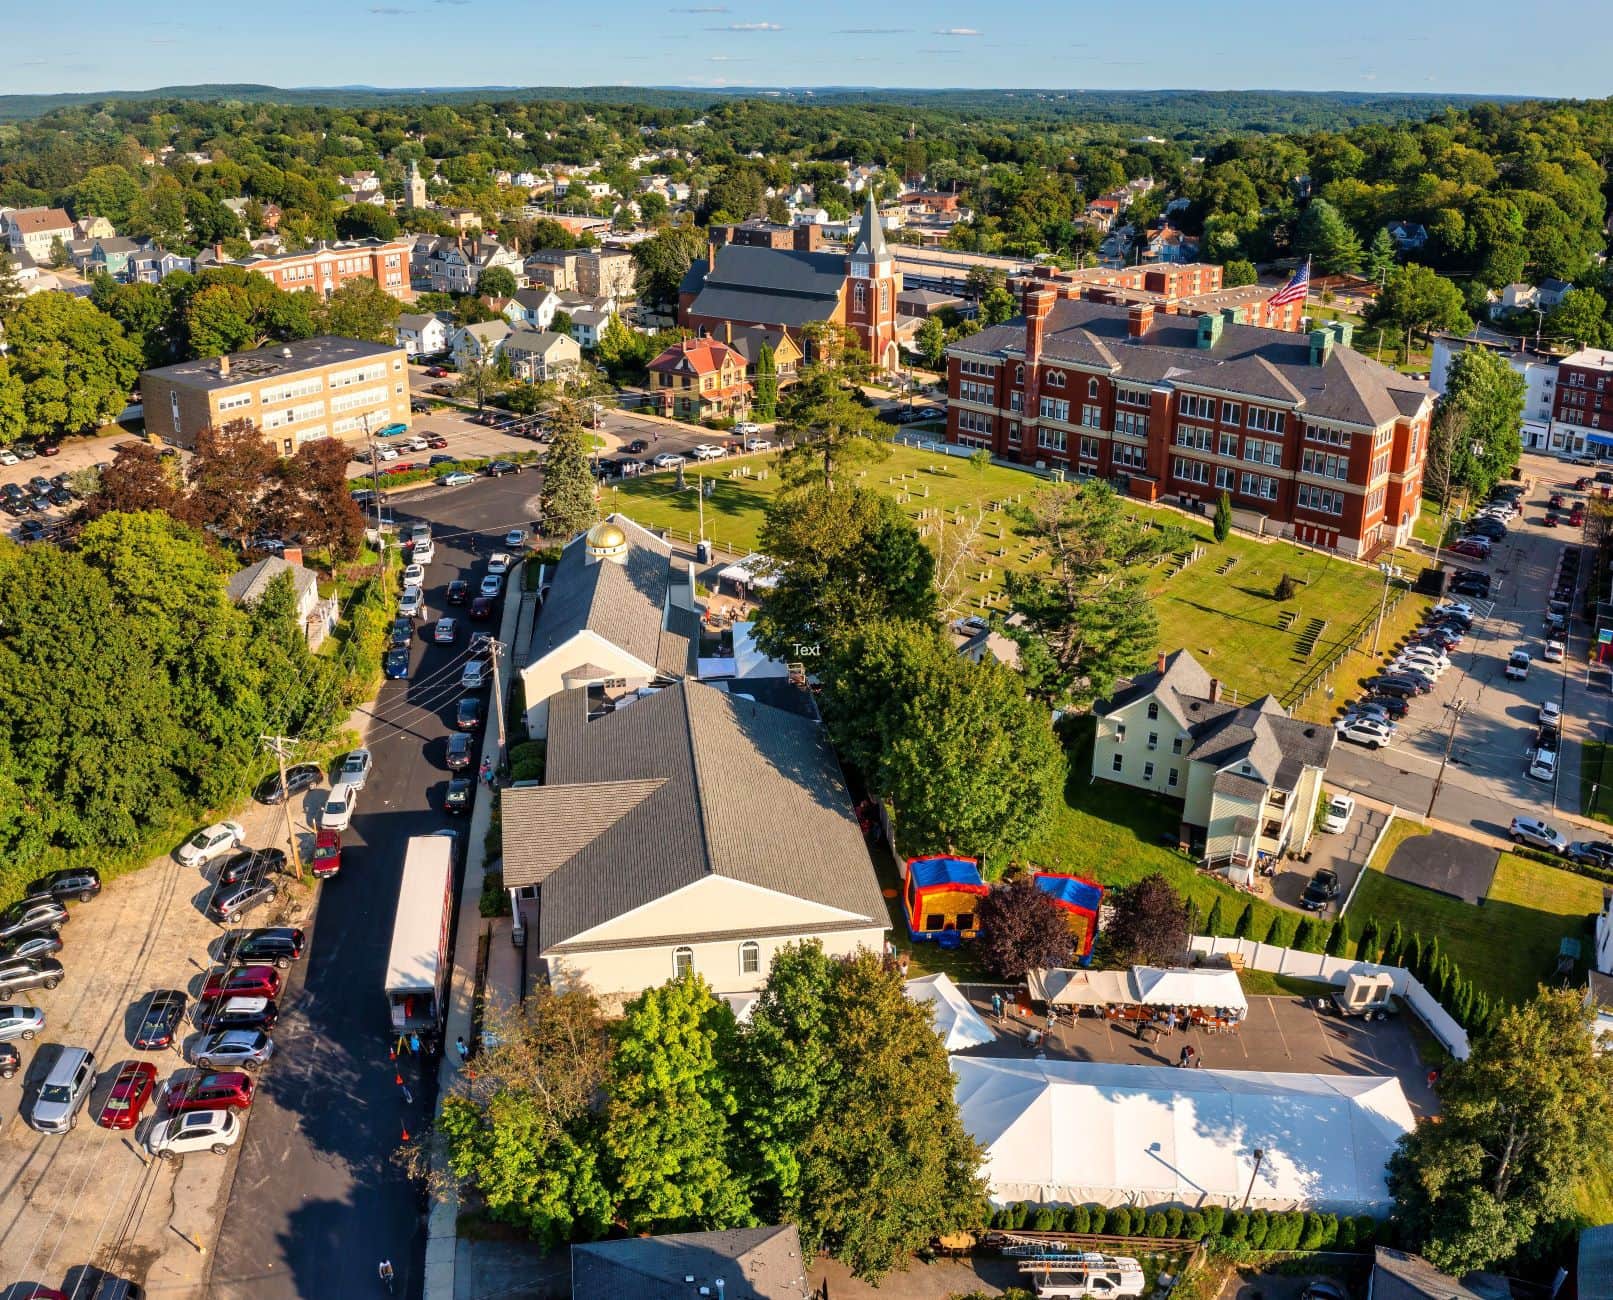 Aerial photography showed cars lined up on Central St. beside the Sts. Anargyroi Greek Orthodox Church in Marlborough during the Greek Festival last weekend. (Photo/Tami White